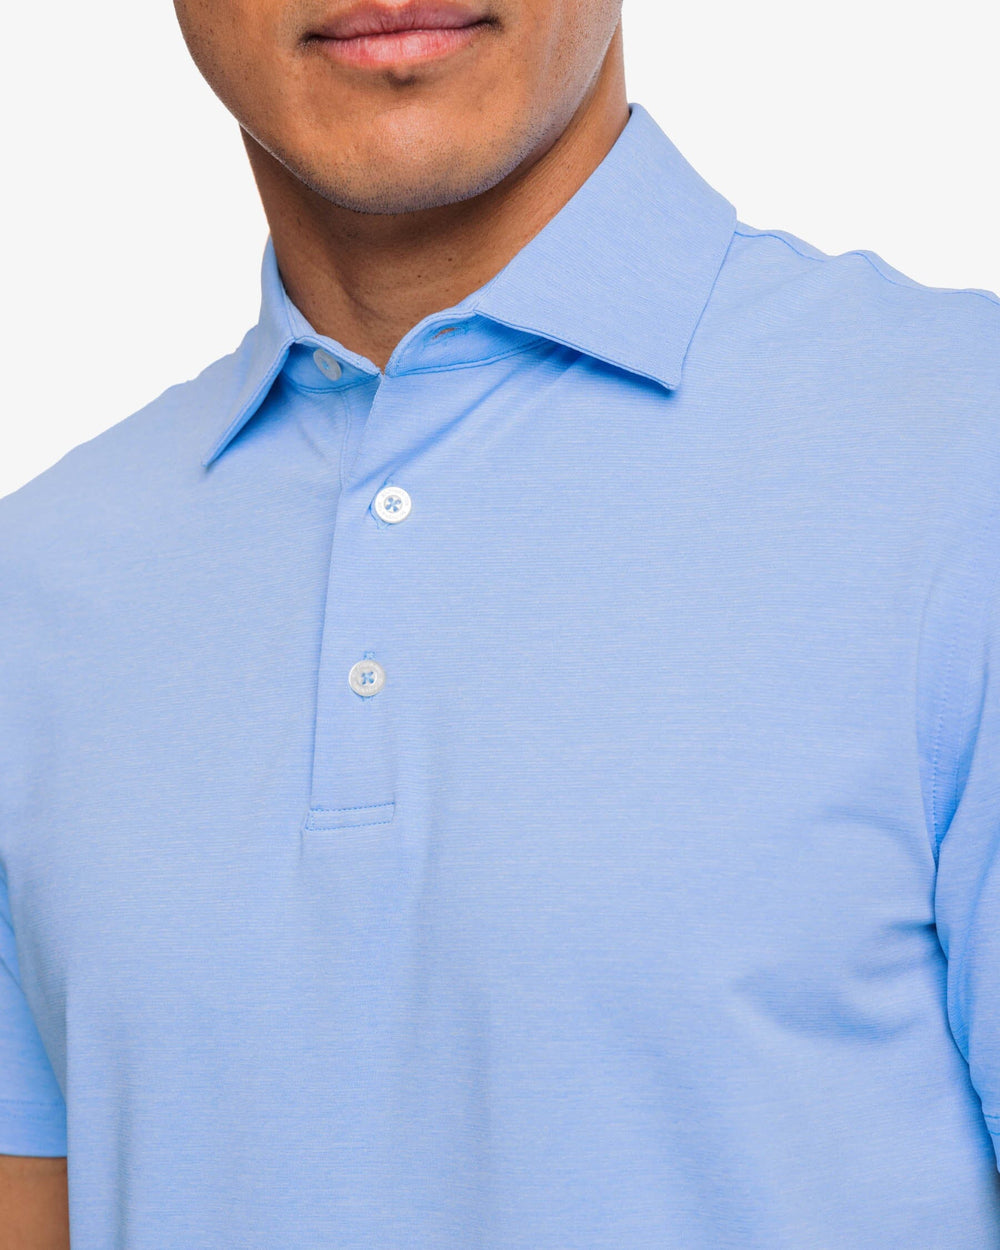 The detail view of the brrr°®-eeze Heather Performance Polo Shirt by Southern Tide - Heather Ocean Channel